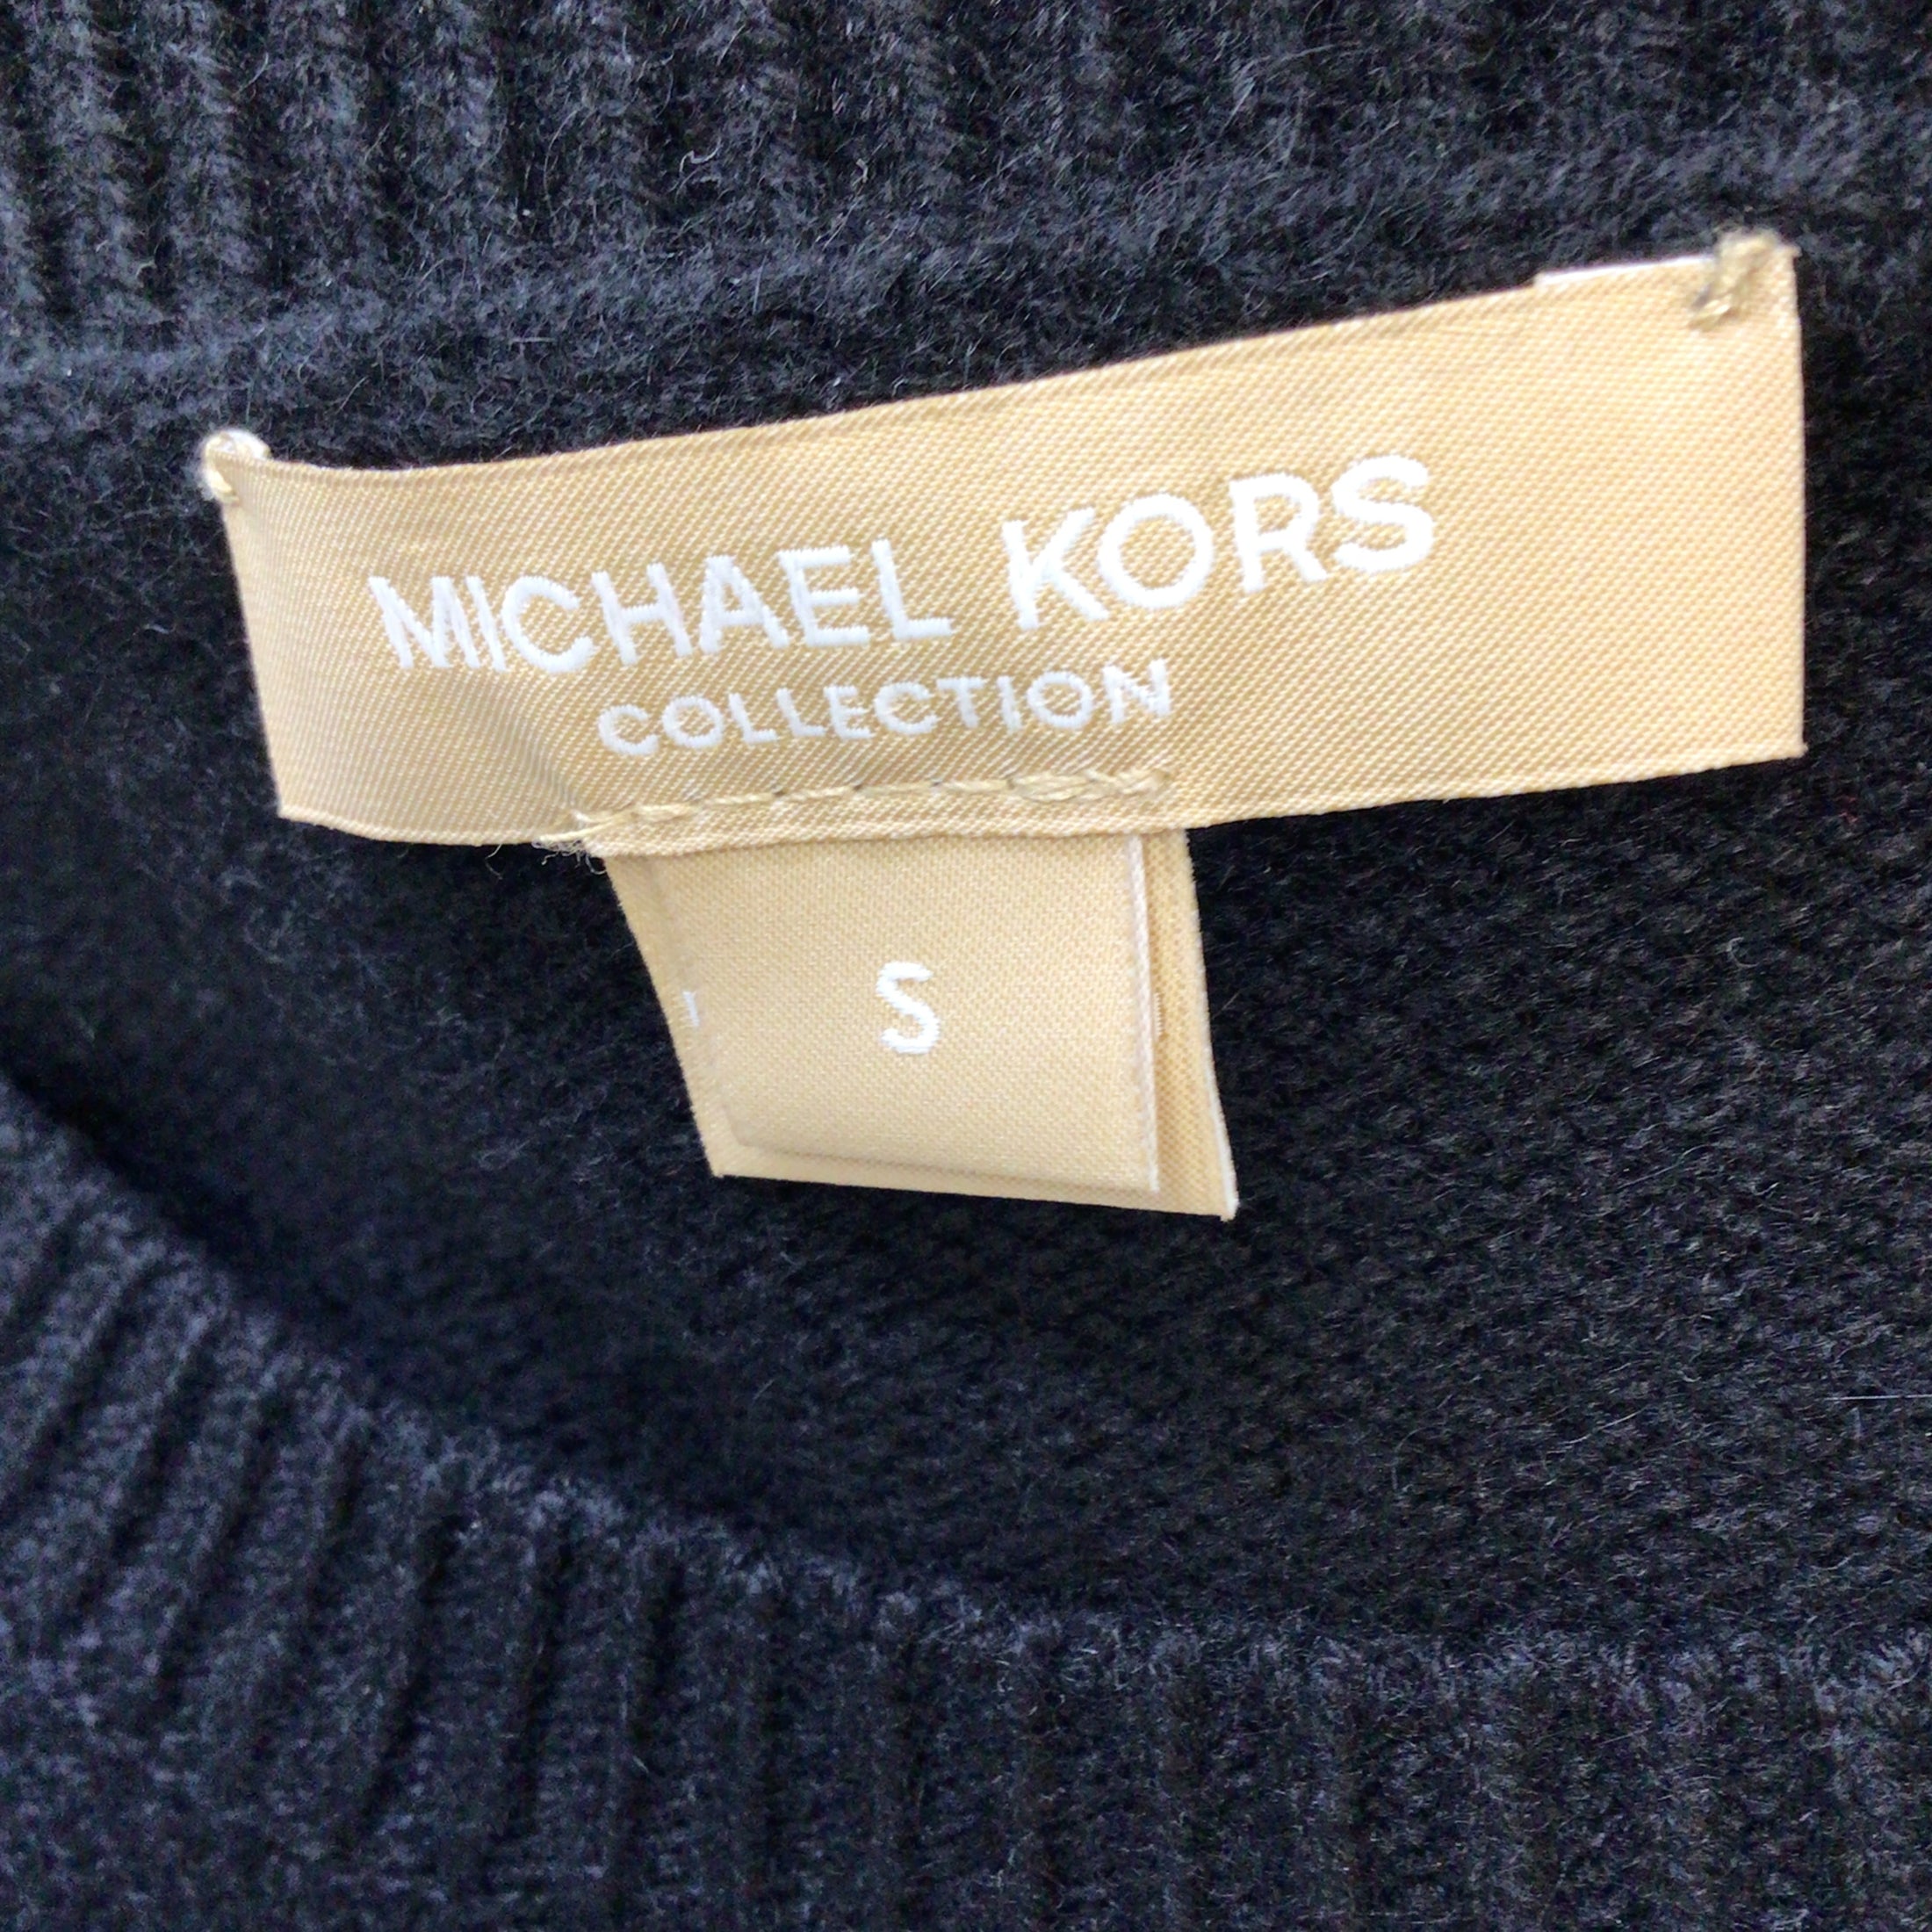 Michael Kors Collection Black Mink-Cuffed Cashmere Pullover Sweater